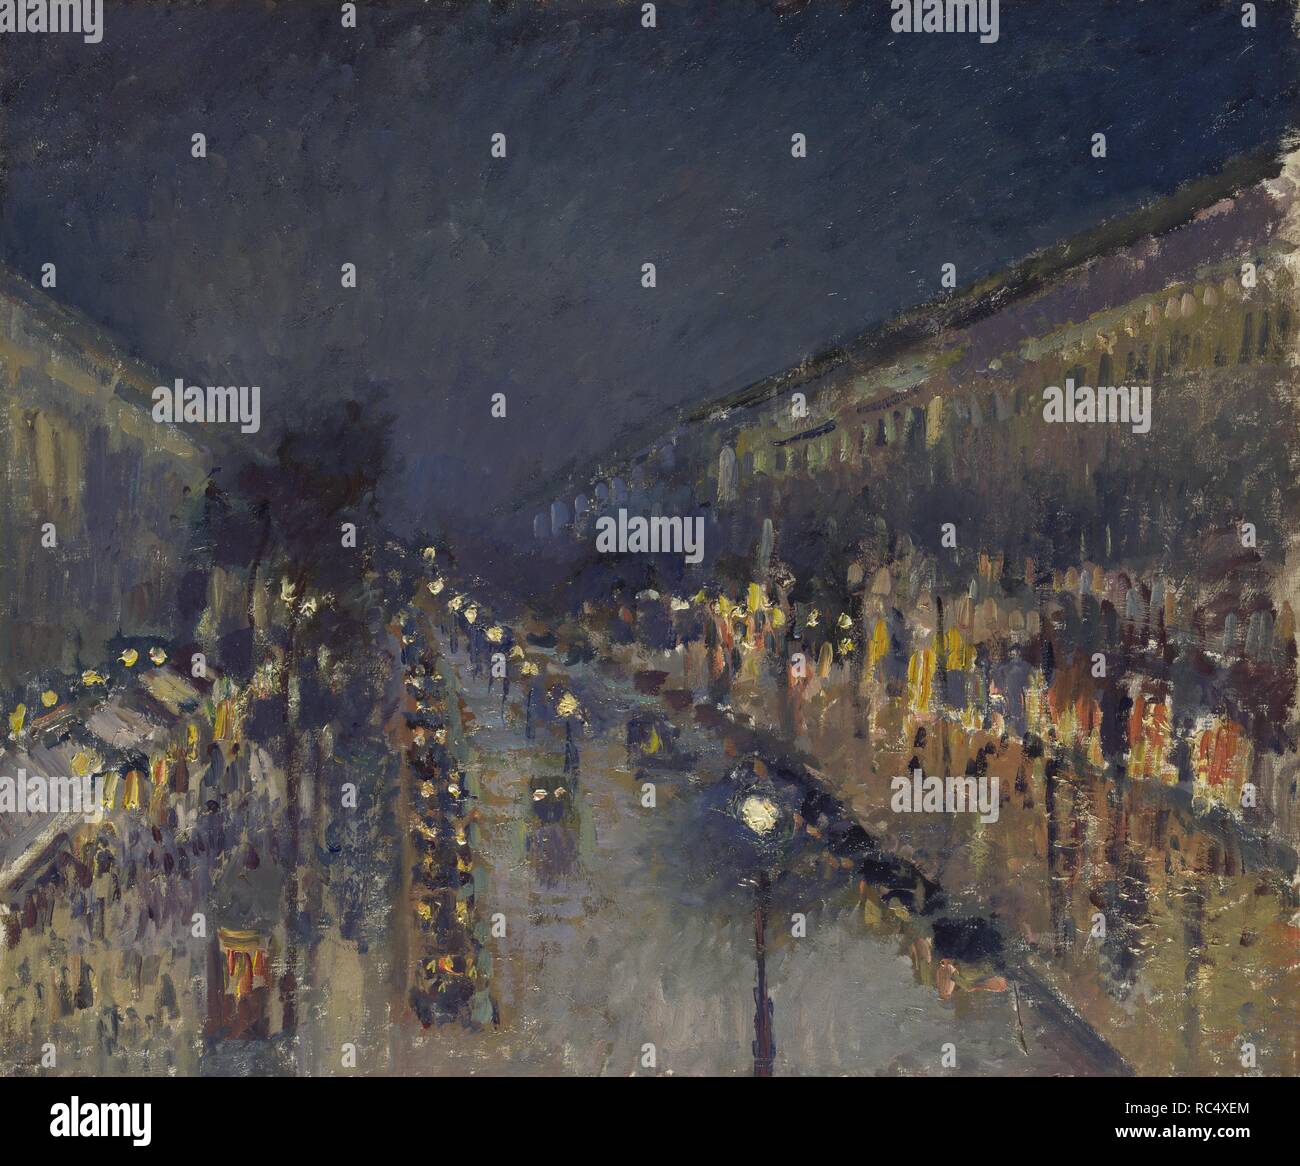 The Boulevard Montmartre at Night. Museum: National Gallery, London. Author: PISSARRO, CAMILLE. Stock Photo